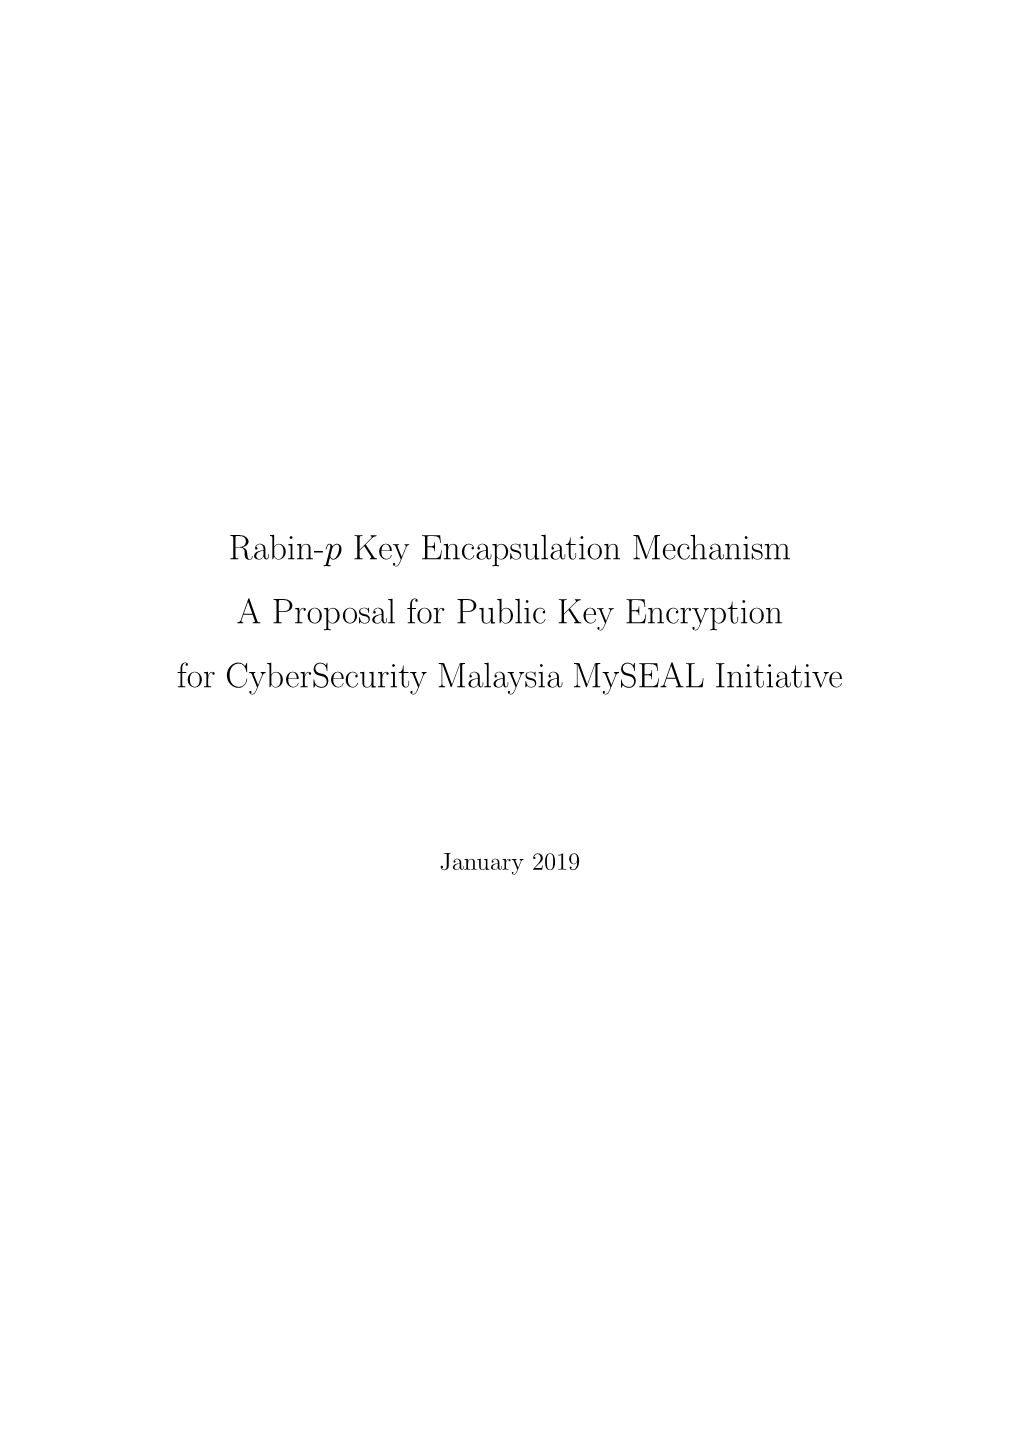 Rabin-P Key Encapsulation Mechanism a Proposal for Public Key Encryption for Cybersecurity Malaysia Myseal Initiative